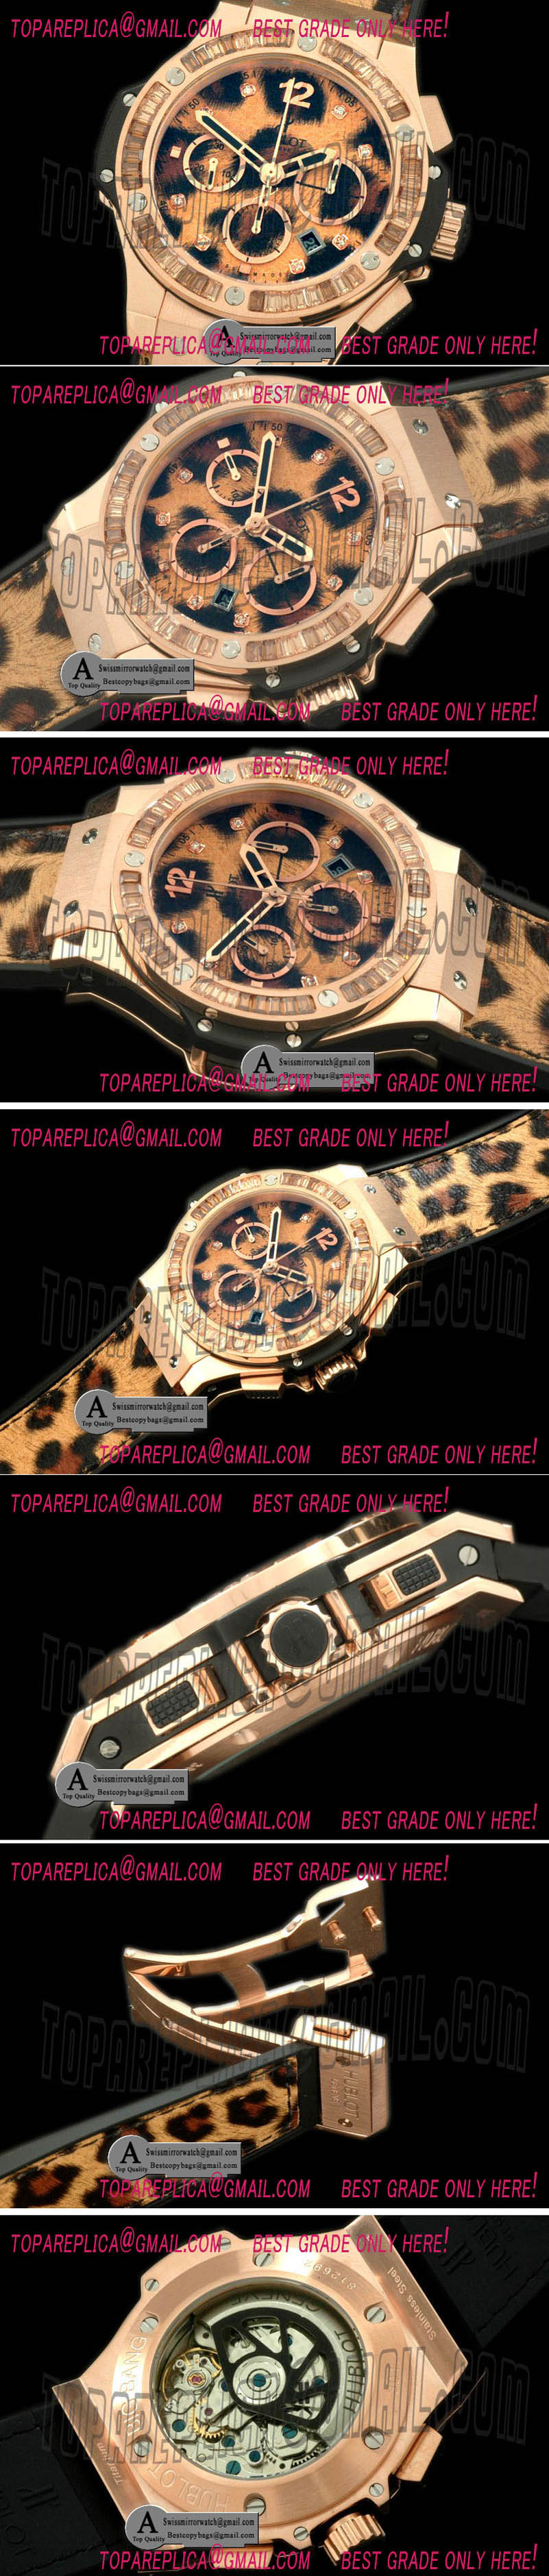 Hublot Leopard Bang Rose Gold Leather A-7750 Replica Watches